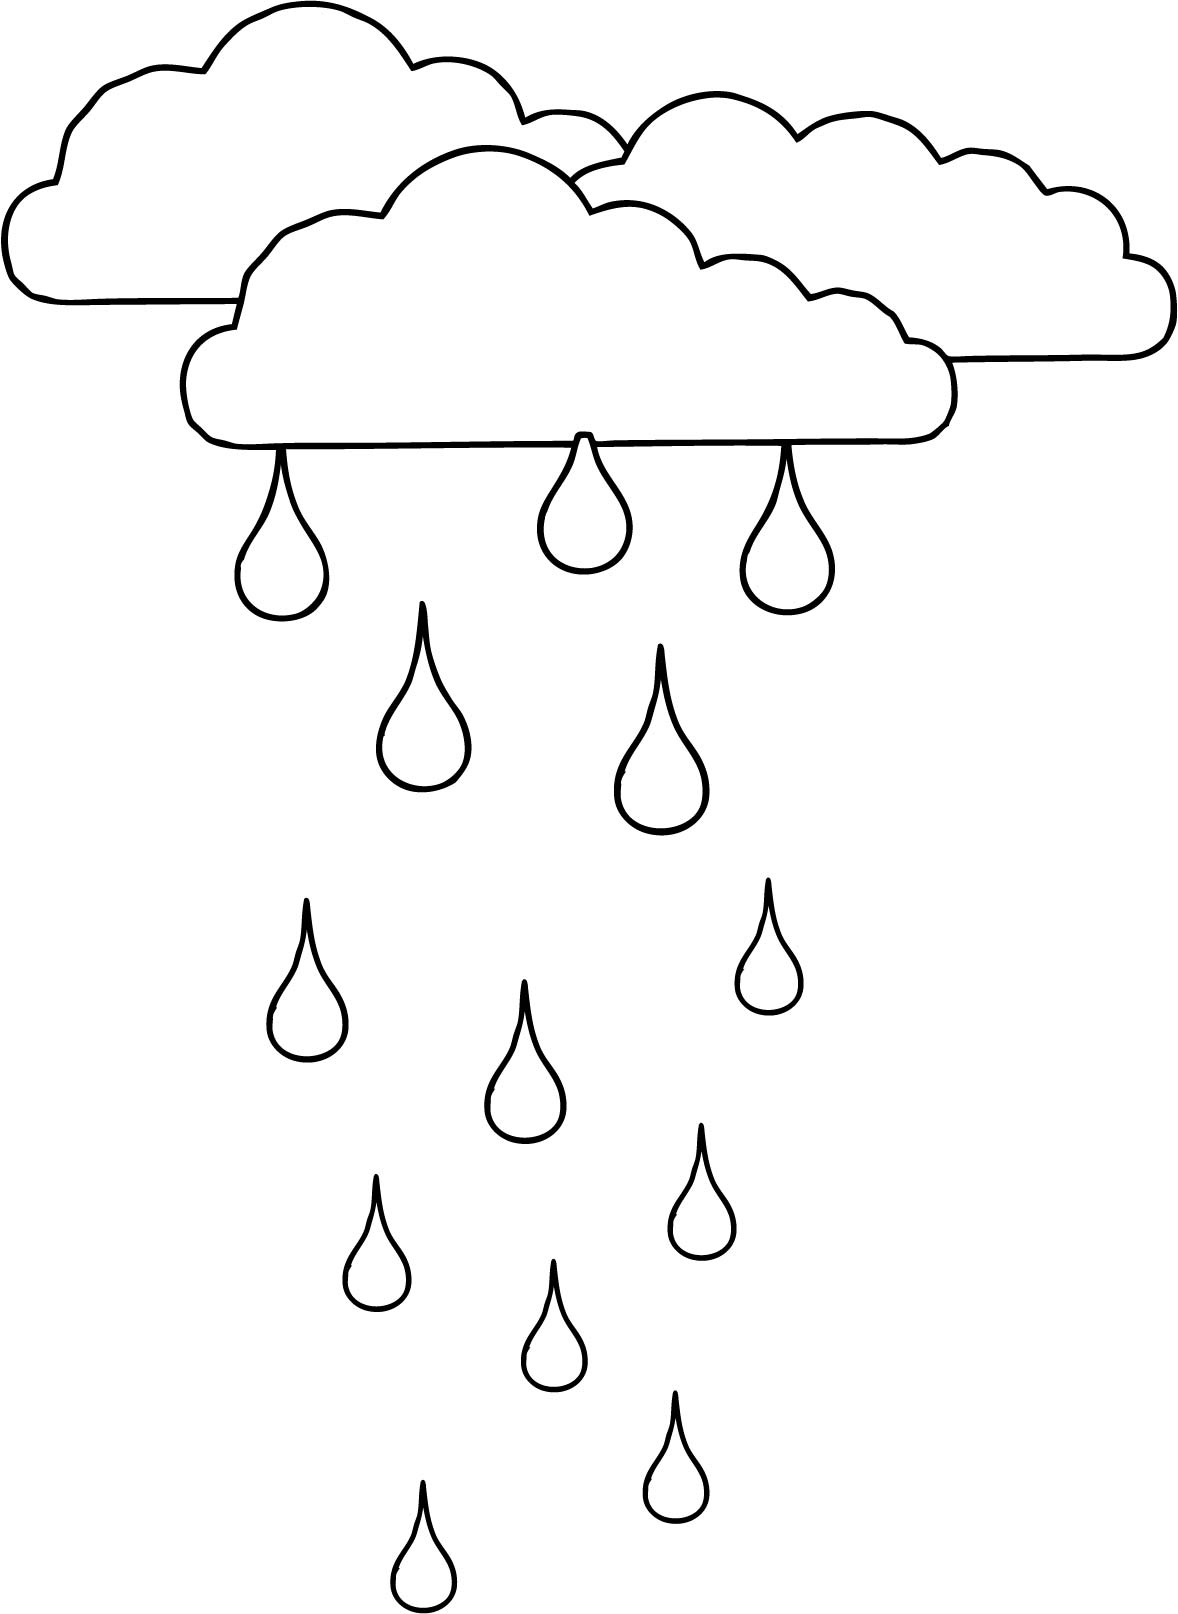 rain-falling-coloring-pages-coloring-pages